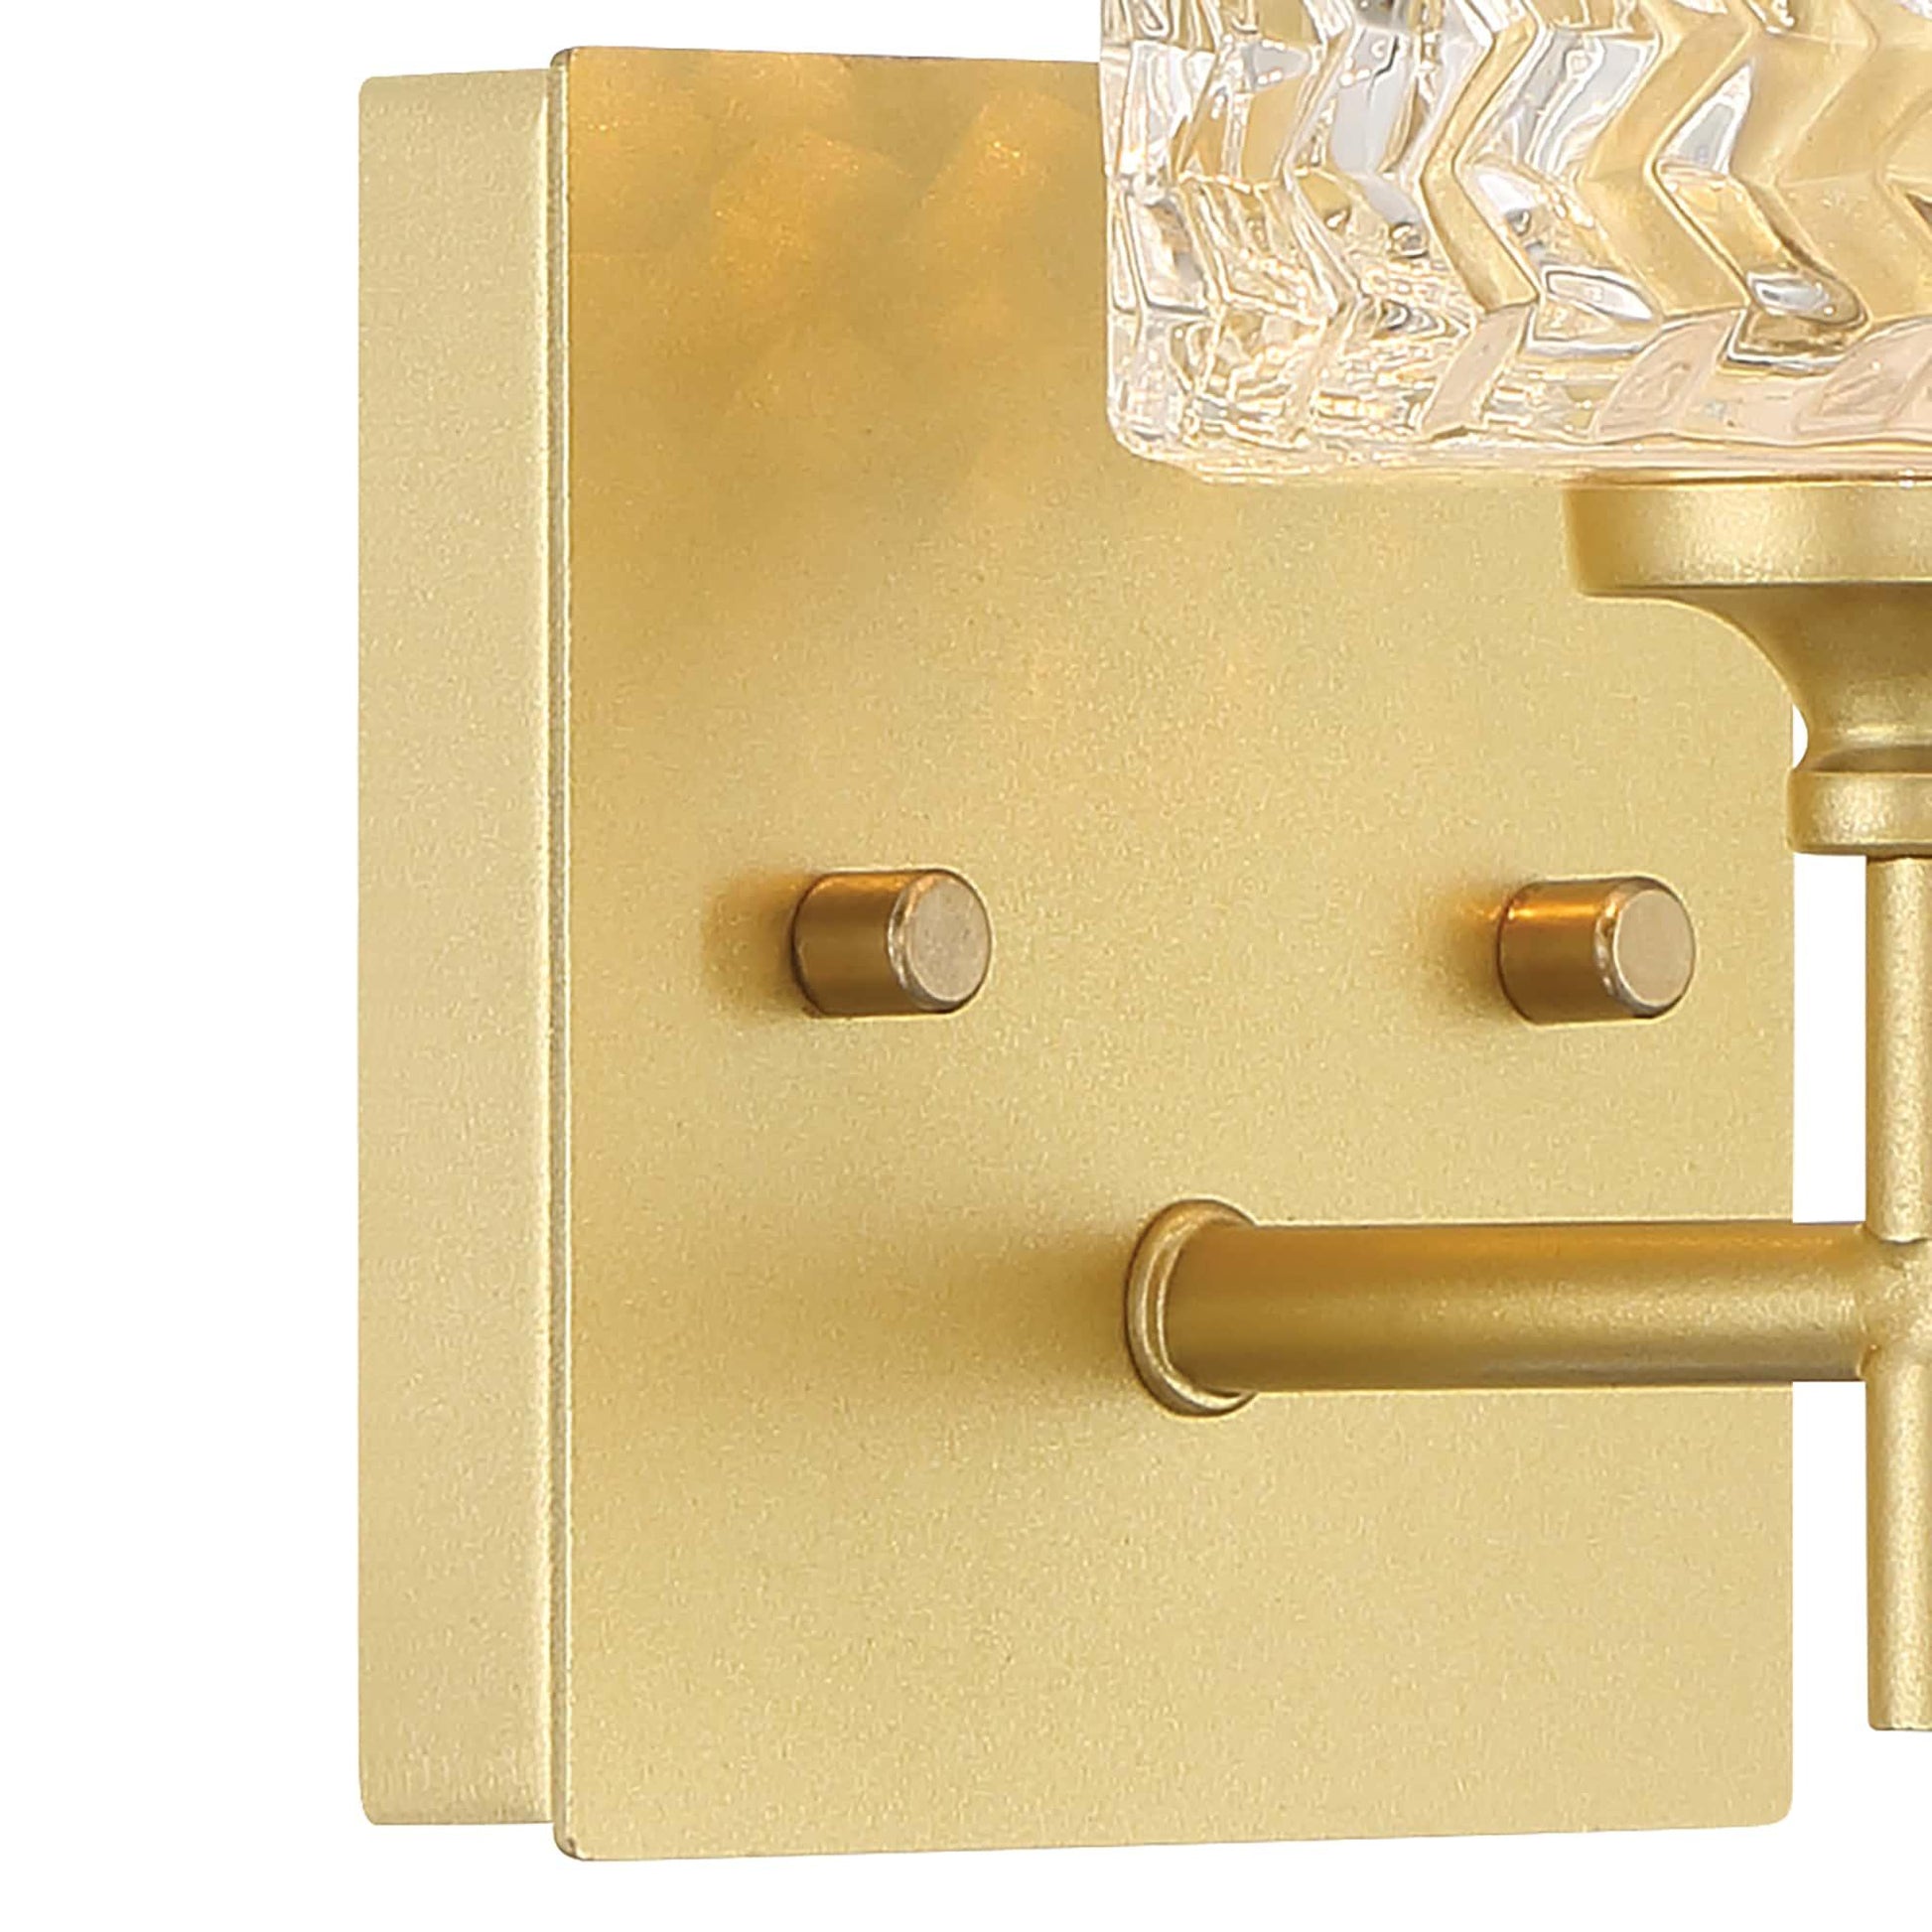 1 light gold glass wall sconce (7) by ACROMA